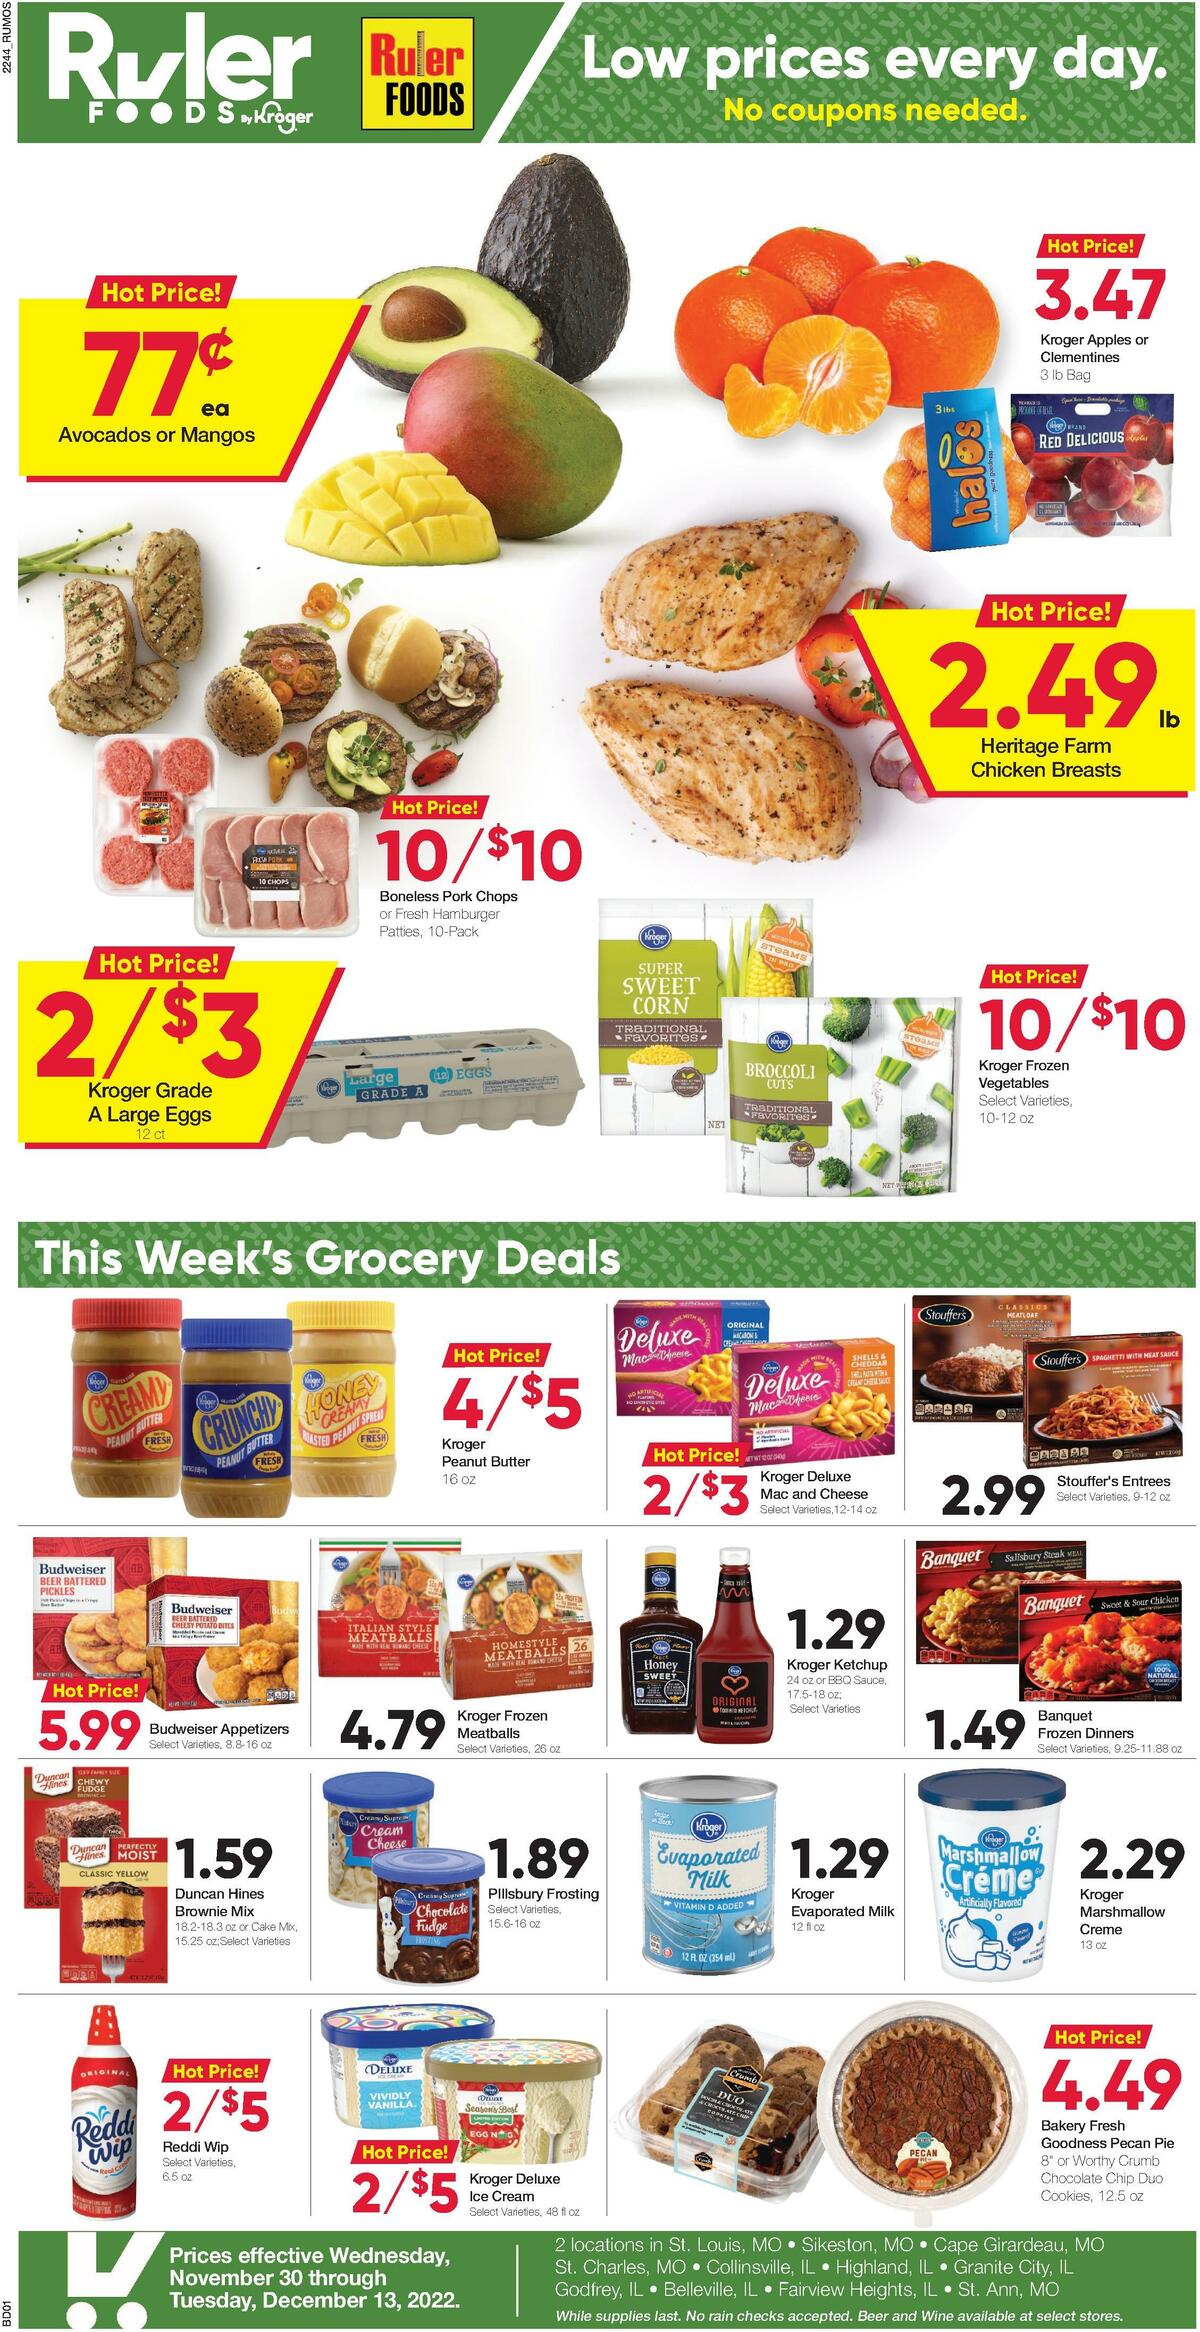 Ruler Foods Weekly Ad from November 30